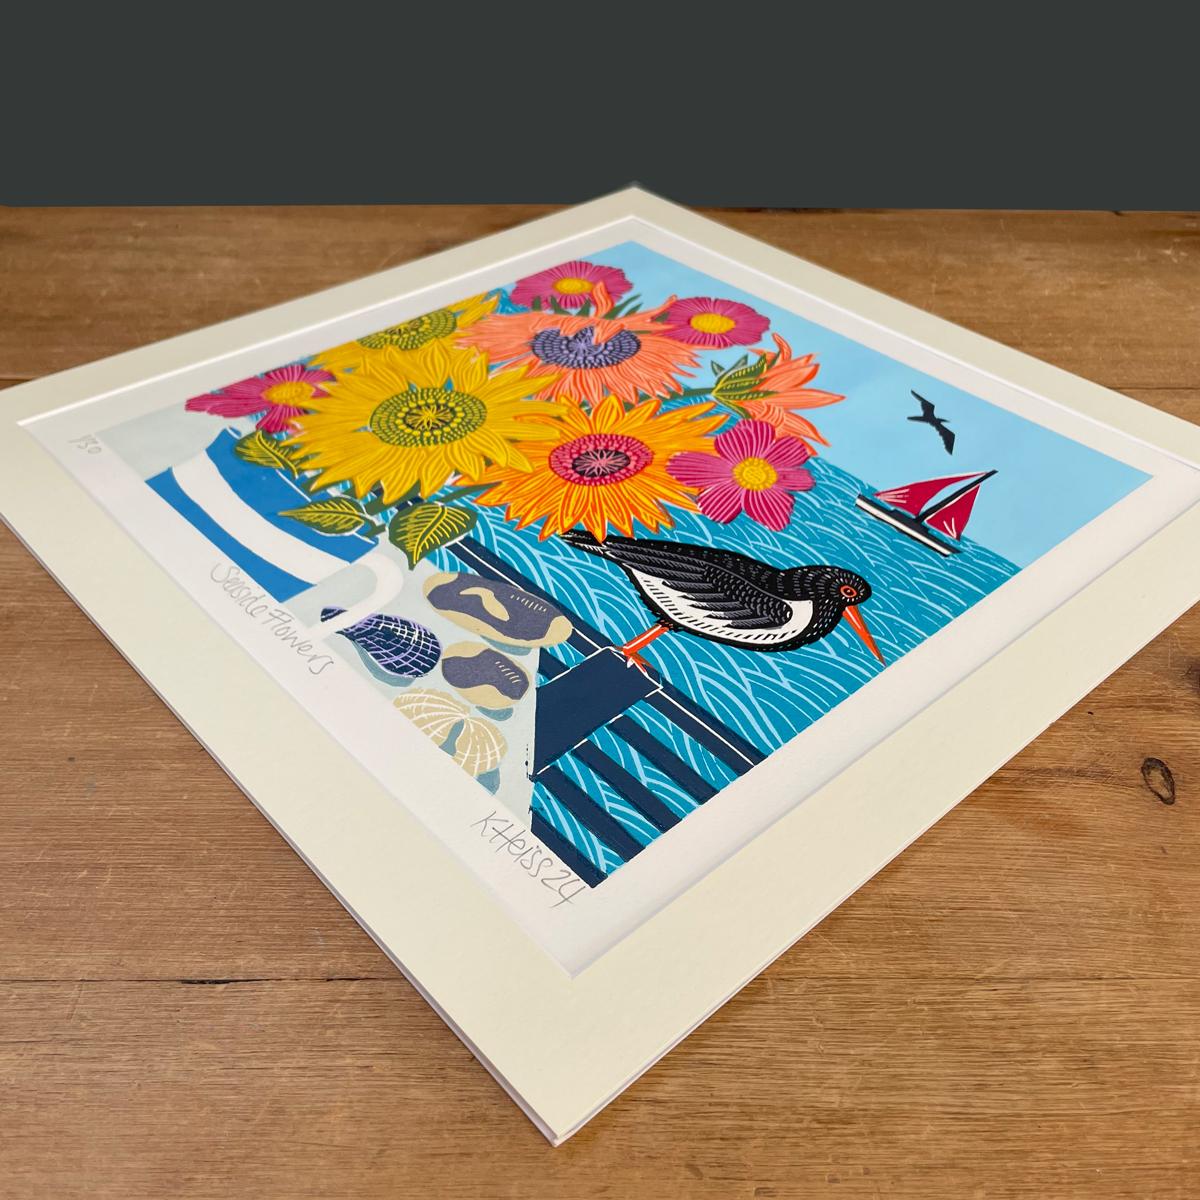 A bunch of cheery sunflowers arranged in a Cornish Ware jug sits pride of place on the window sill of this harbour cottage. A collection of beach finds from the day are laid out on the table and a solitary oystercatcher is perched outside watching